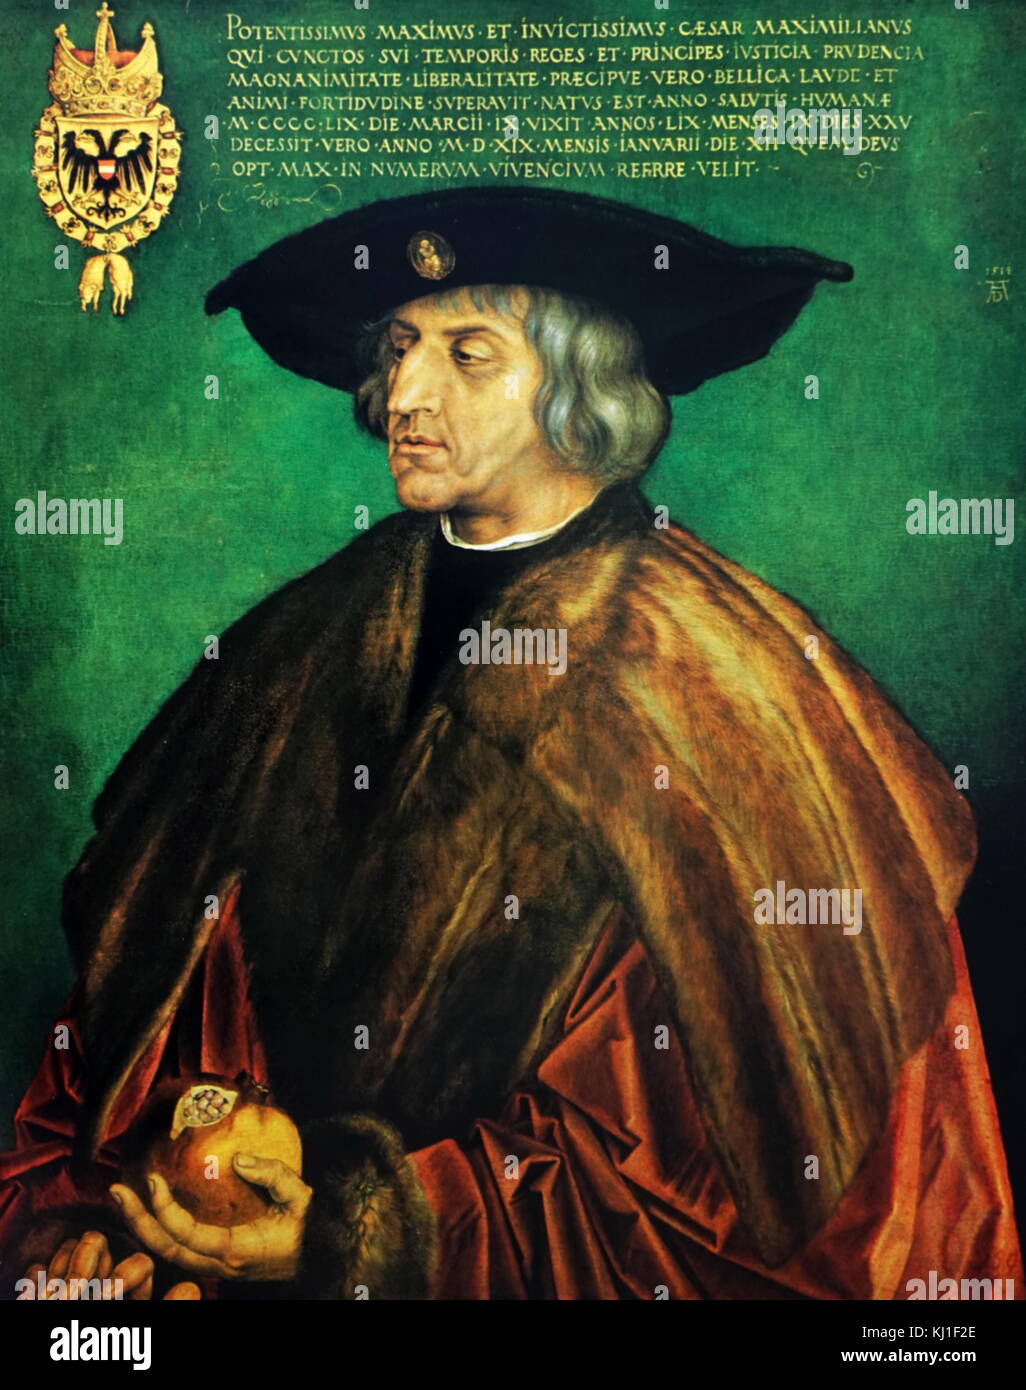 Maximilian I (1459 – 1519);King of the Romans (also known as King of the Germans) from 1486. Portrait by Albrecht Durer. Holy Roman Emperor from 1493 until his death, though he was never crowned by the Pope, as the journey to Rome was always too risky. He was the son of Frederick III, Holy Roman Emperor, and Eleanor of Portugal. He ruled jointly with his father for the last ten years of his father's reign, from c. 1483 to 1493. Stock Photo